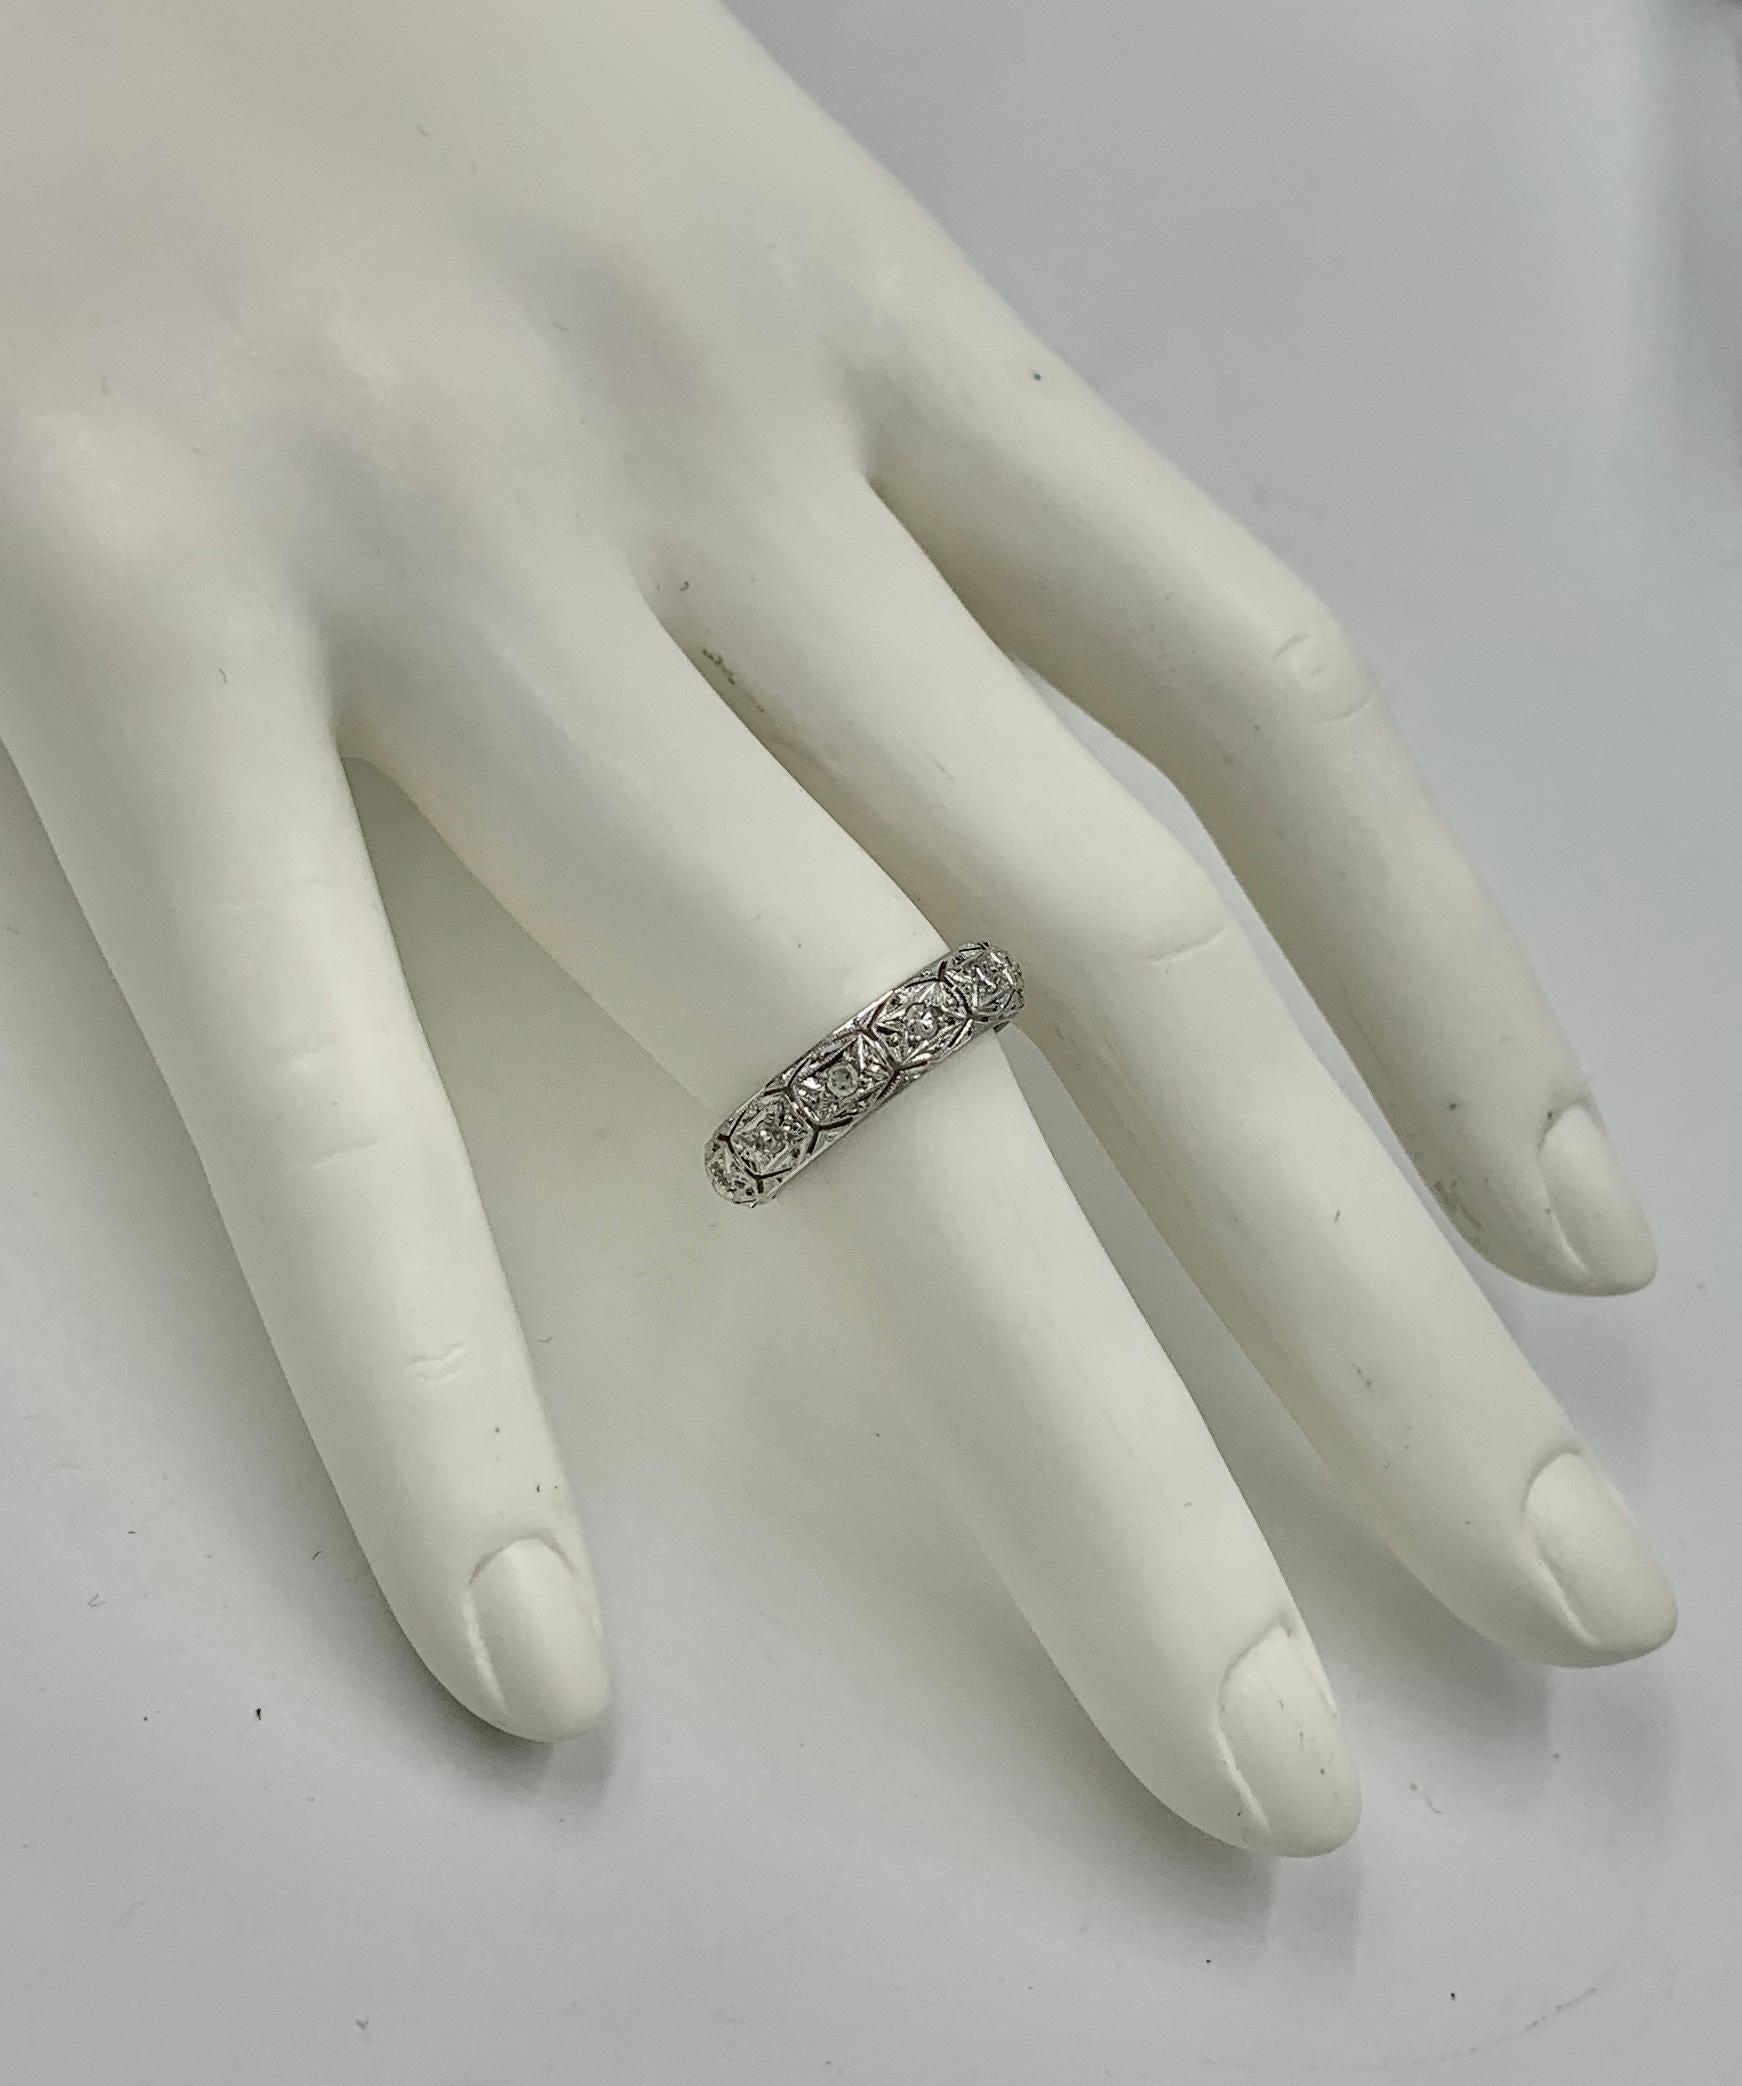 An Antique Diamond Platinum Eternity Band Wedding Engagement Stacking Ring.  The Size 6 ring has 13 Round Brilliant Cut Diamonds which are beautifully set in the Platinum open work band ring.  I just love the open scroll work design with the